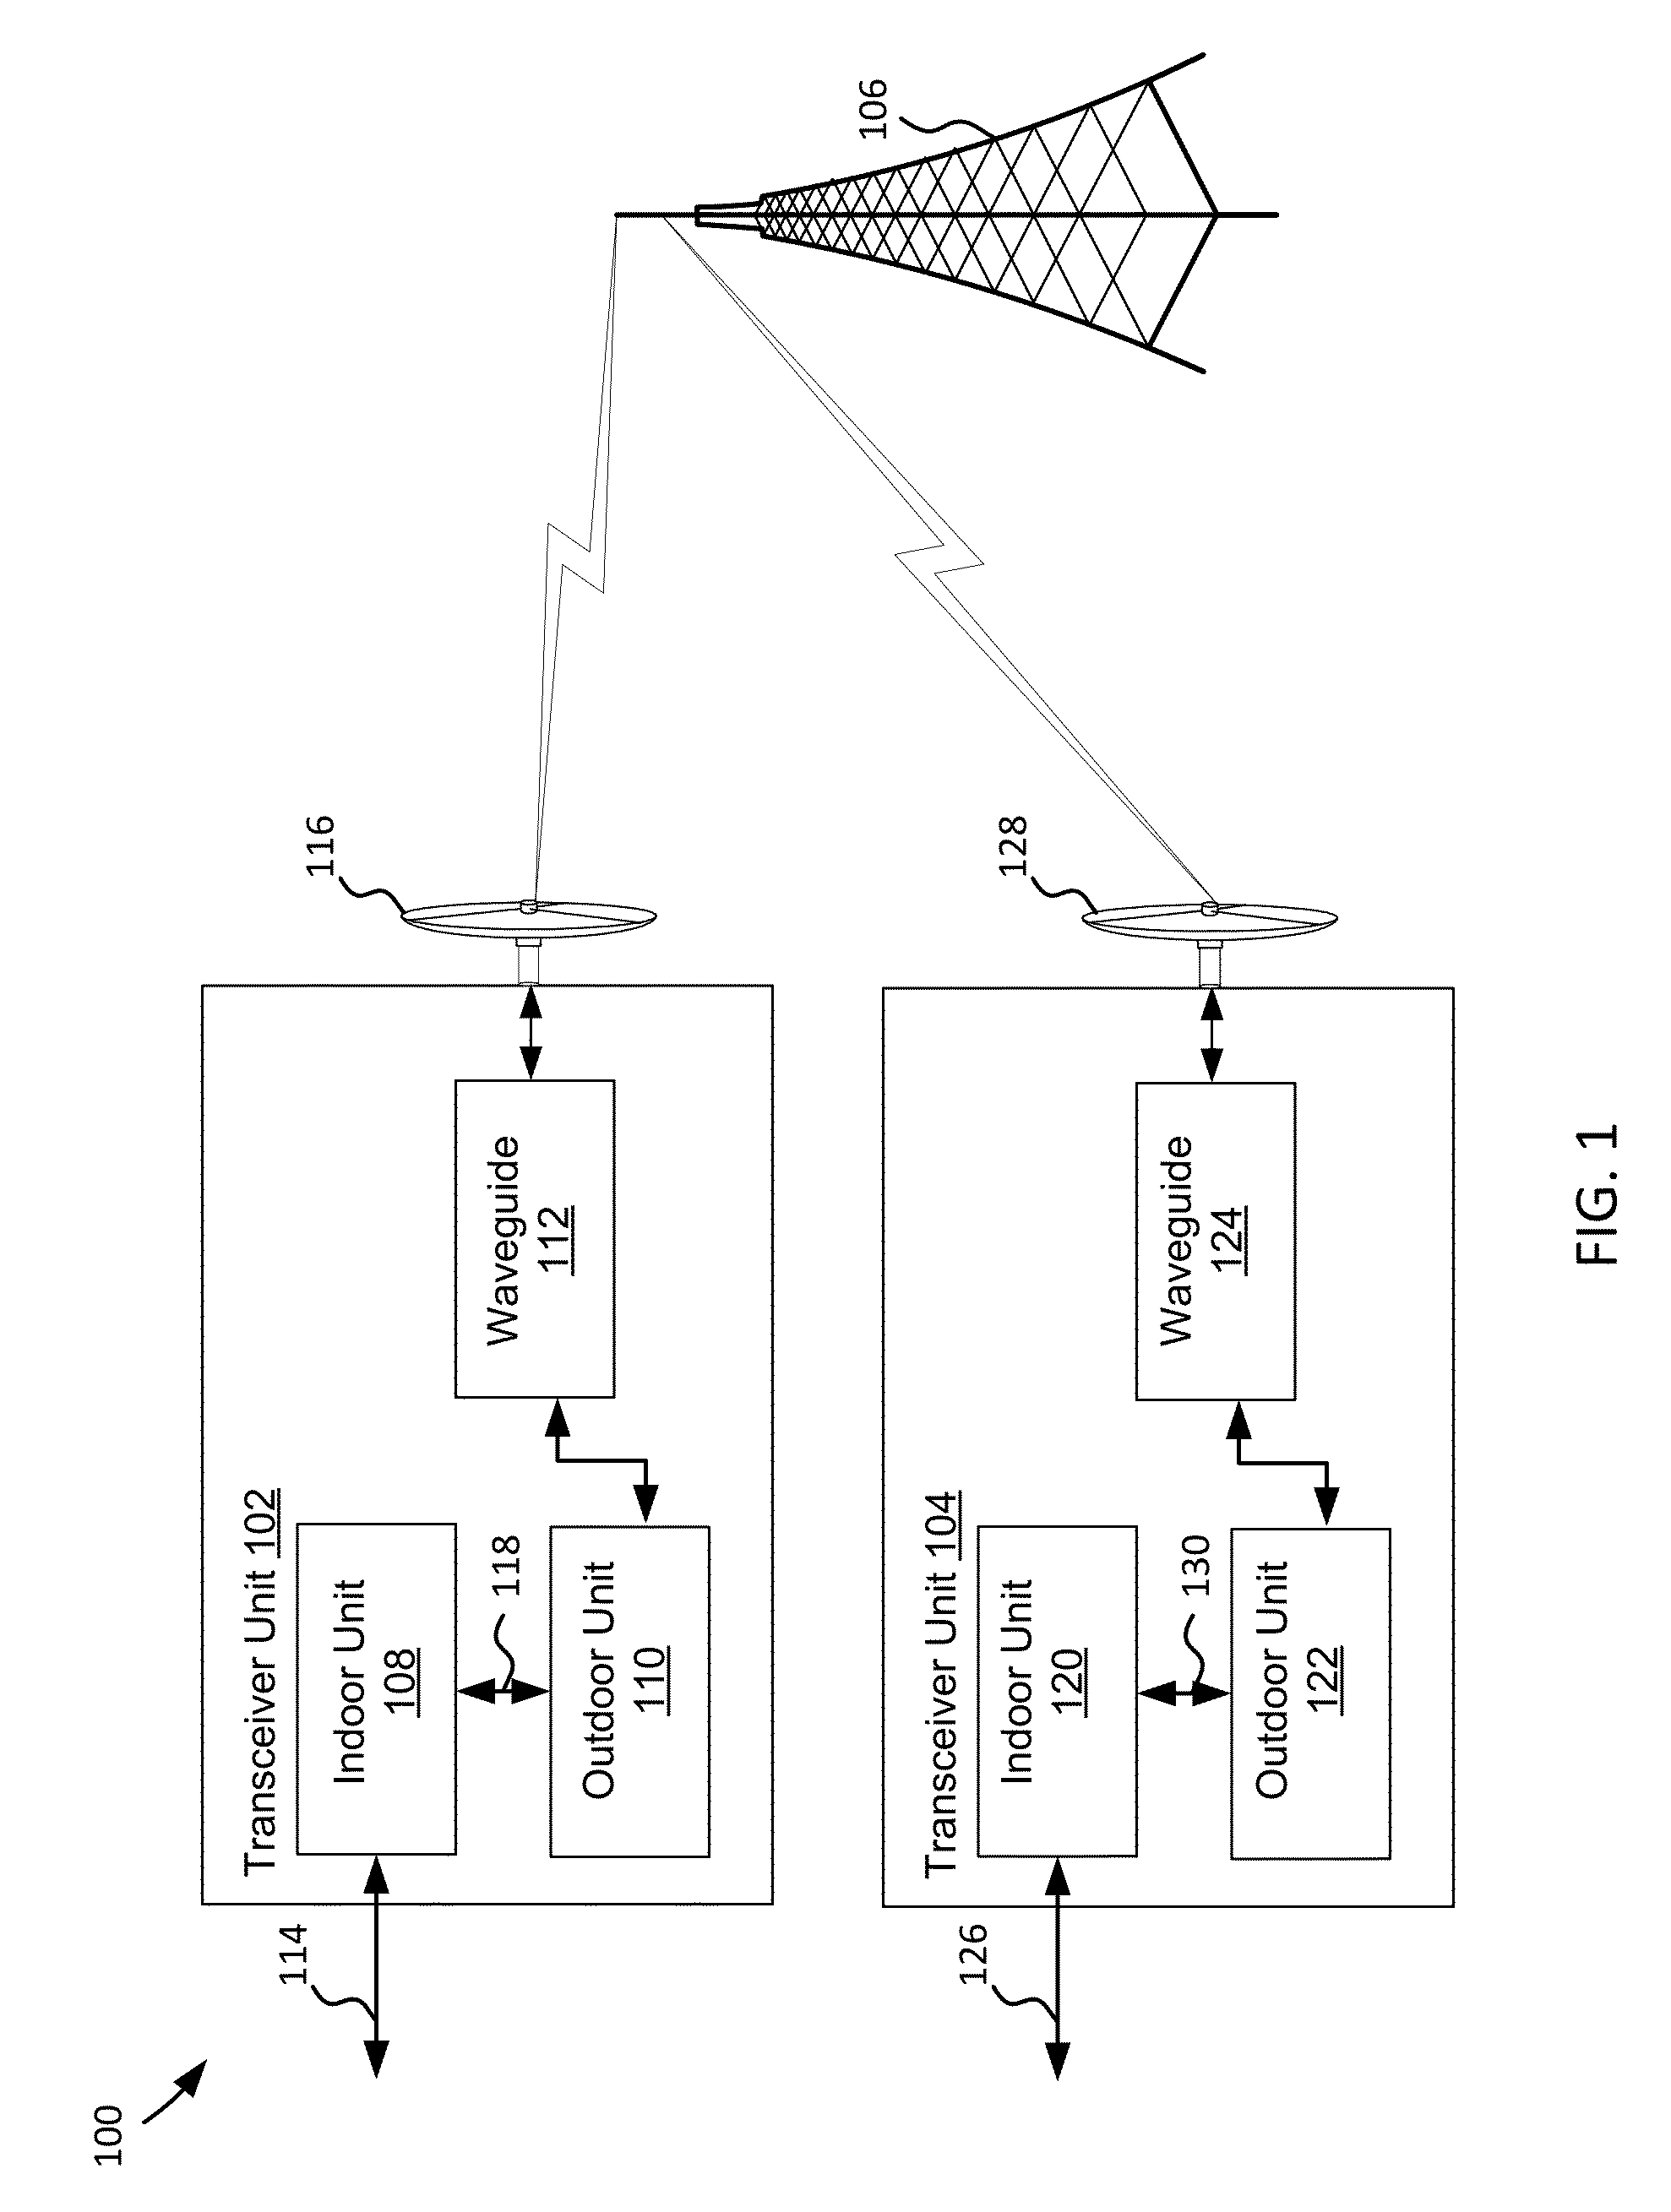 Systems and methods for adaptive power amplifier linearization